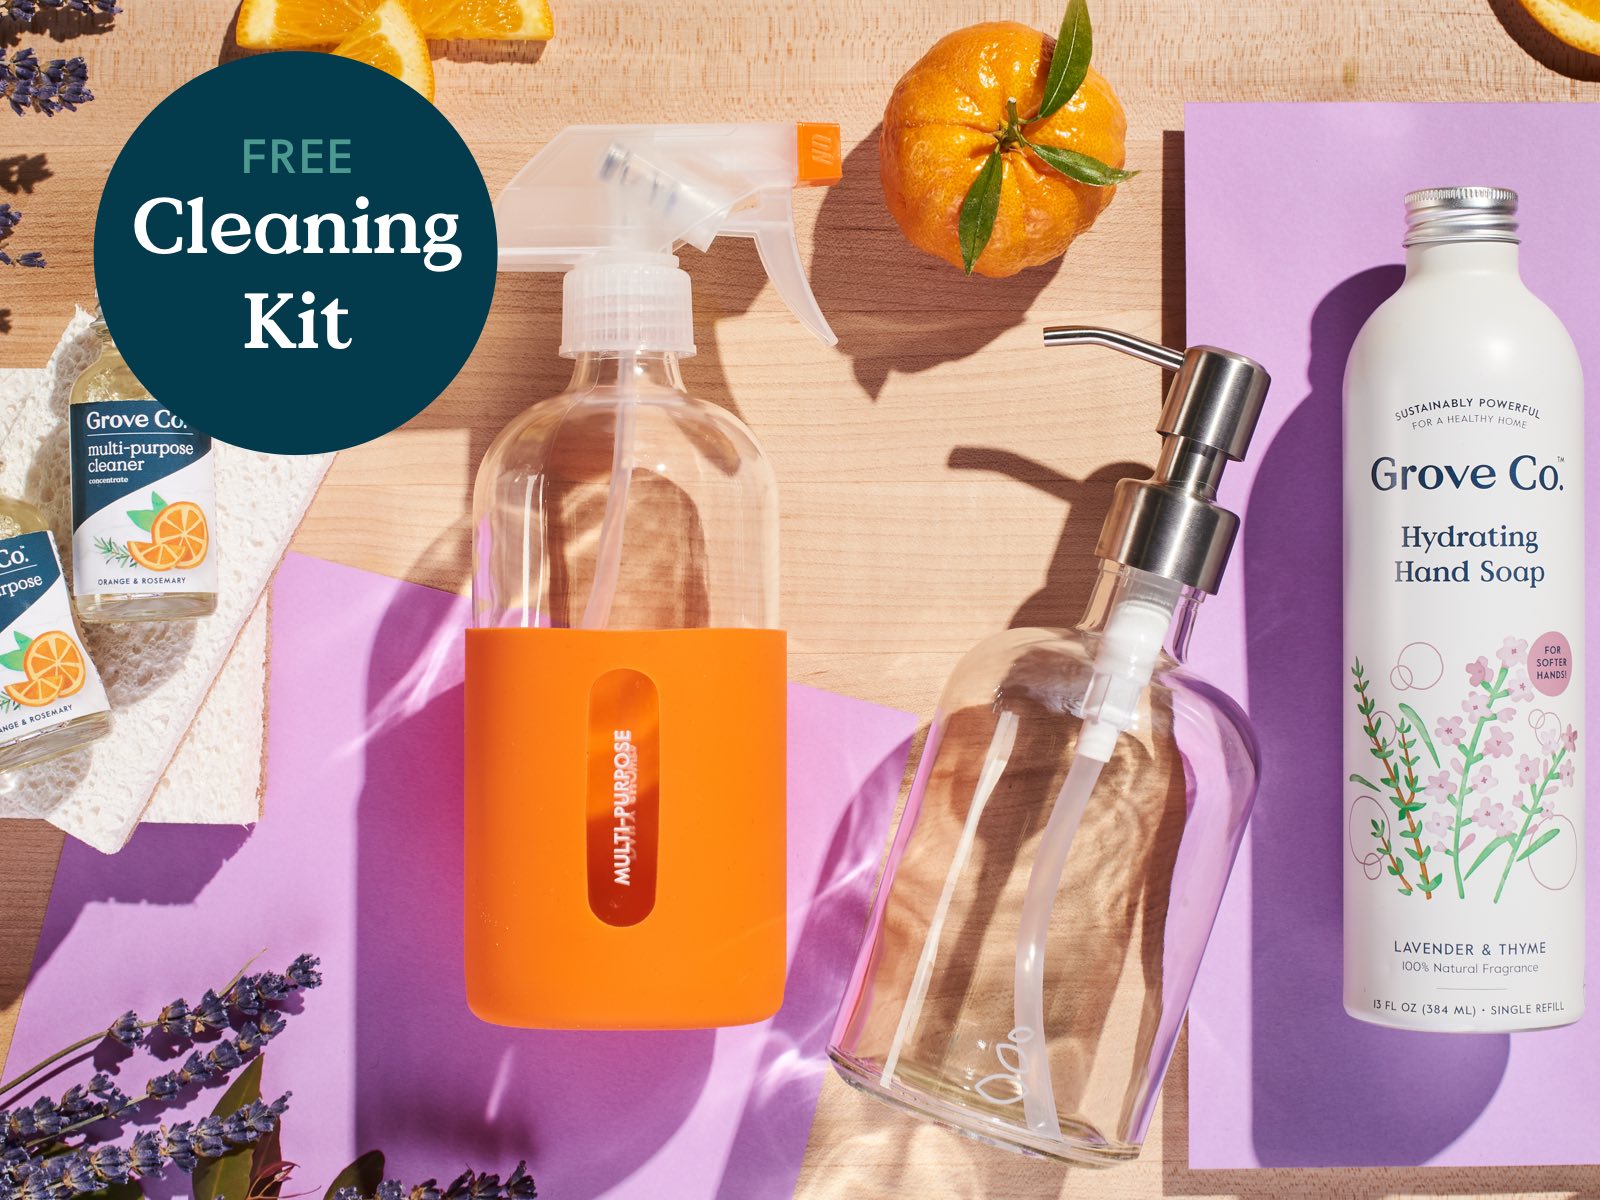 Image of orange glass spray bottle, glass hand soap bottle, refillable aluminum Grove Co. hand soap bottle and cleaning concentrate bottles with Free Cleaning Kit callout